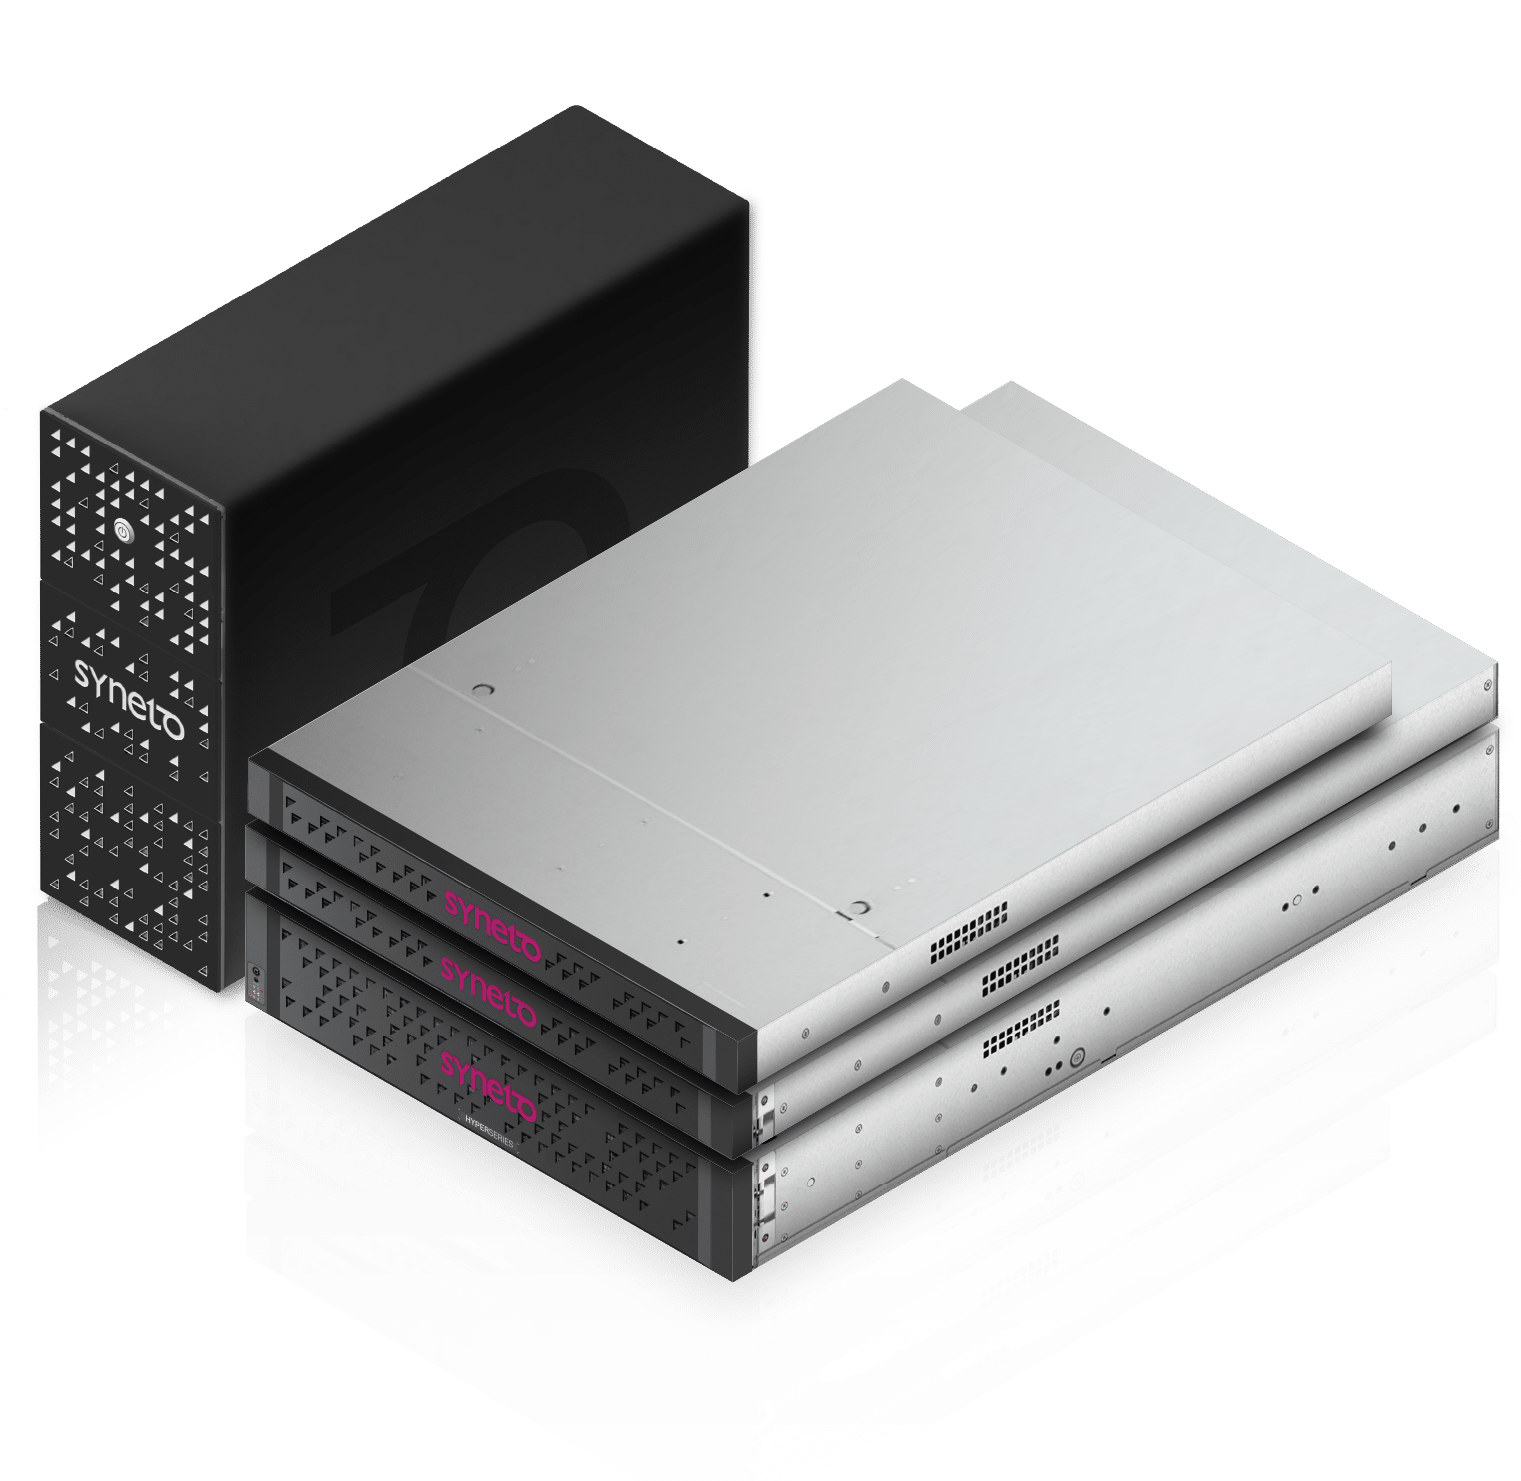 hyper-core-page-hyper-core-appliance-images-hyper-core-isometric-cover-v1.0